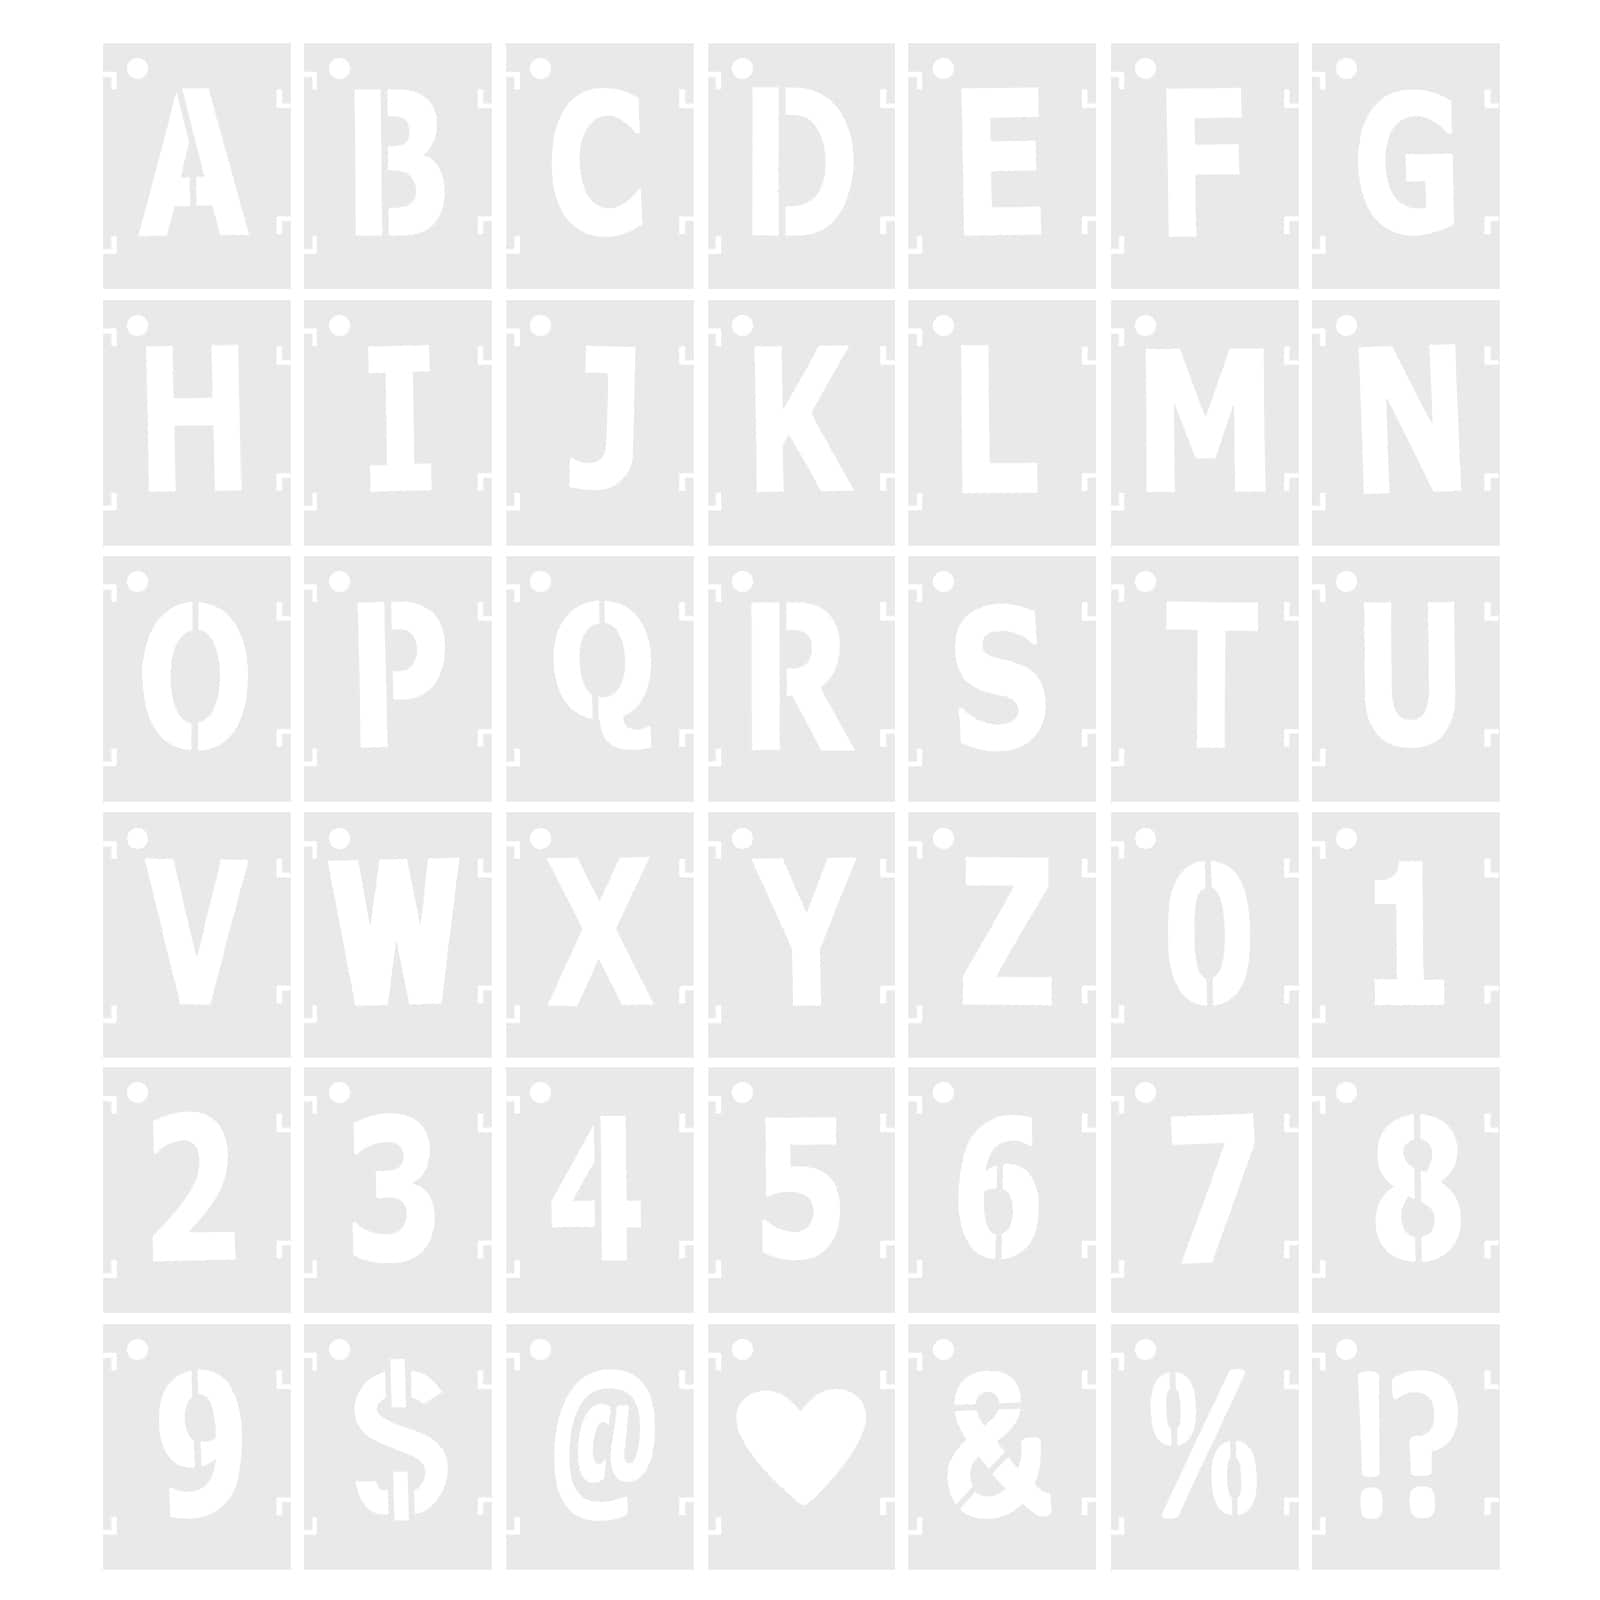 Alphabet and Number Stencil Set - Letters A-Z, Digits 0-9